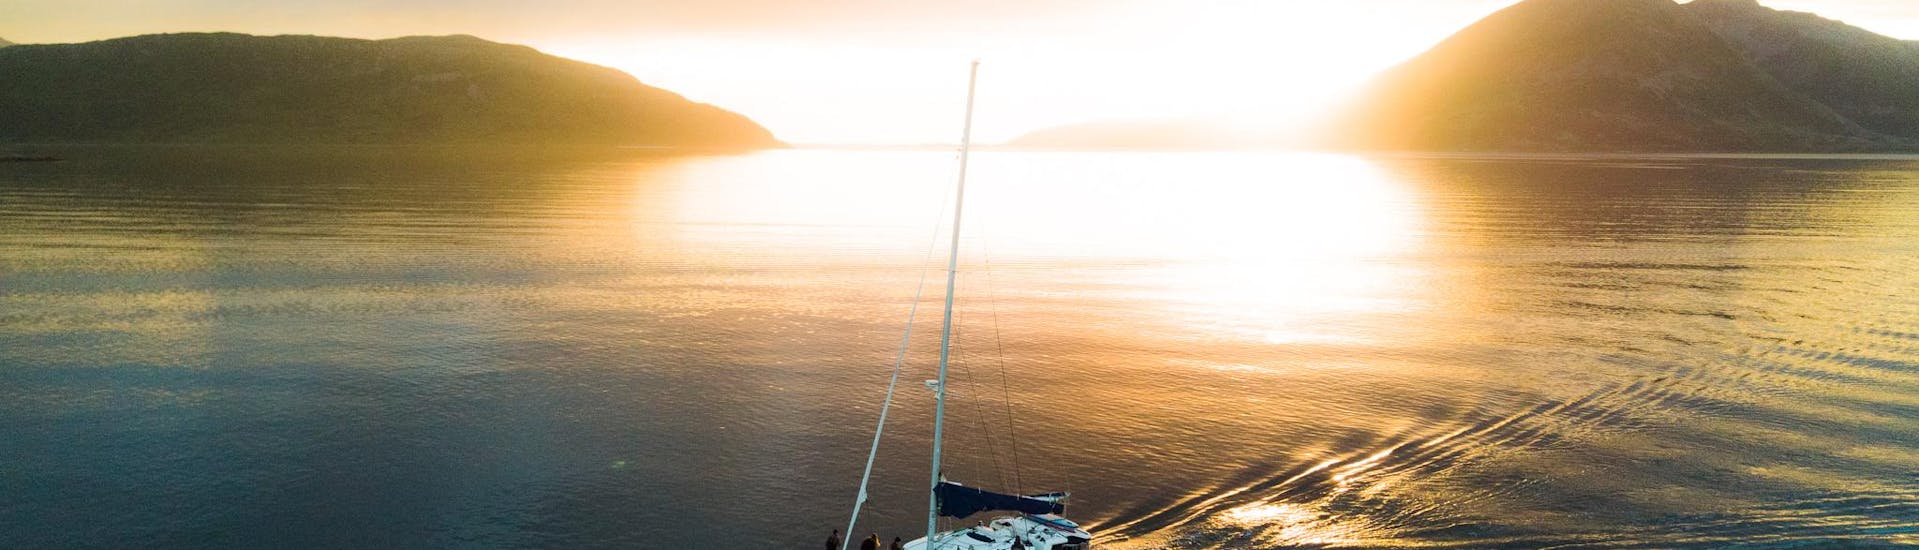 Our beautiful catamaran bathing in the midnight sunlight during the Arctic Midnight Sunset Boat Tour in Tromsø with Pukka Travels.